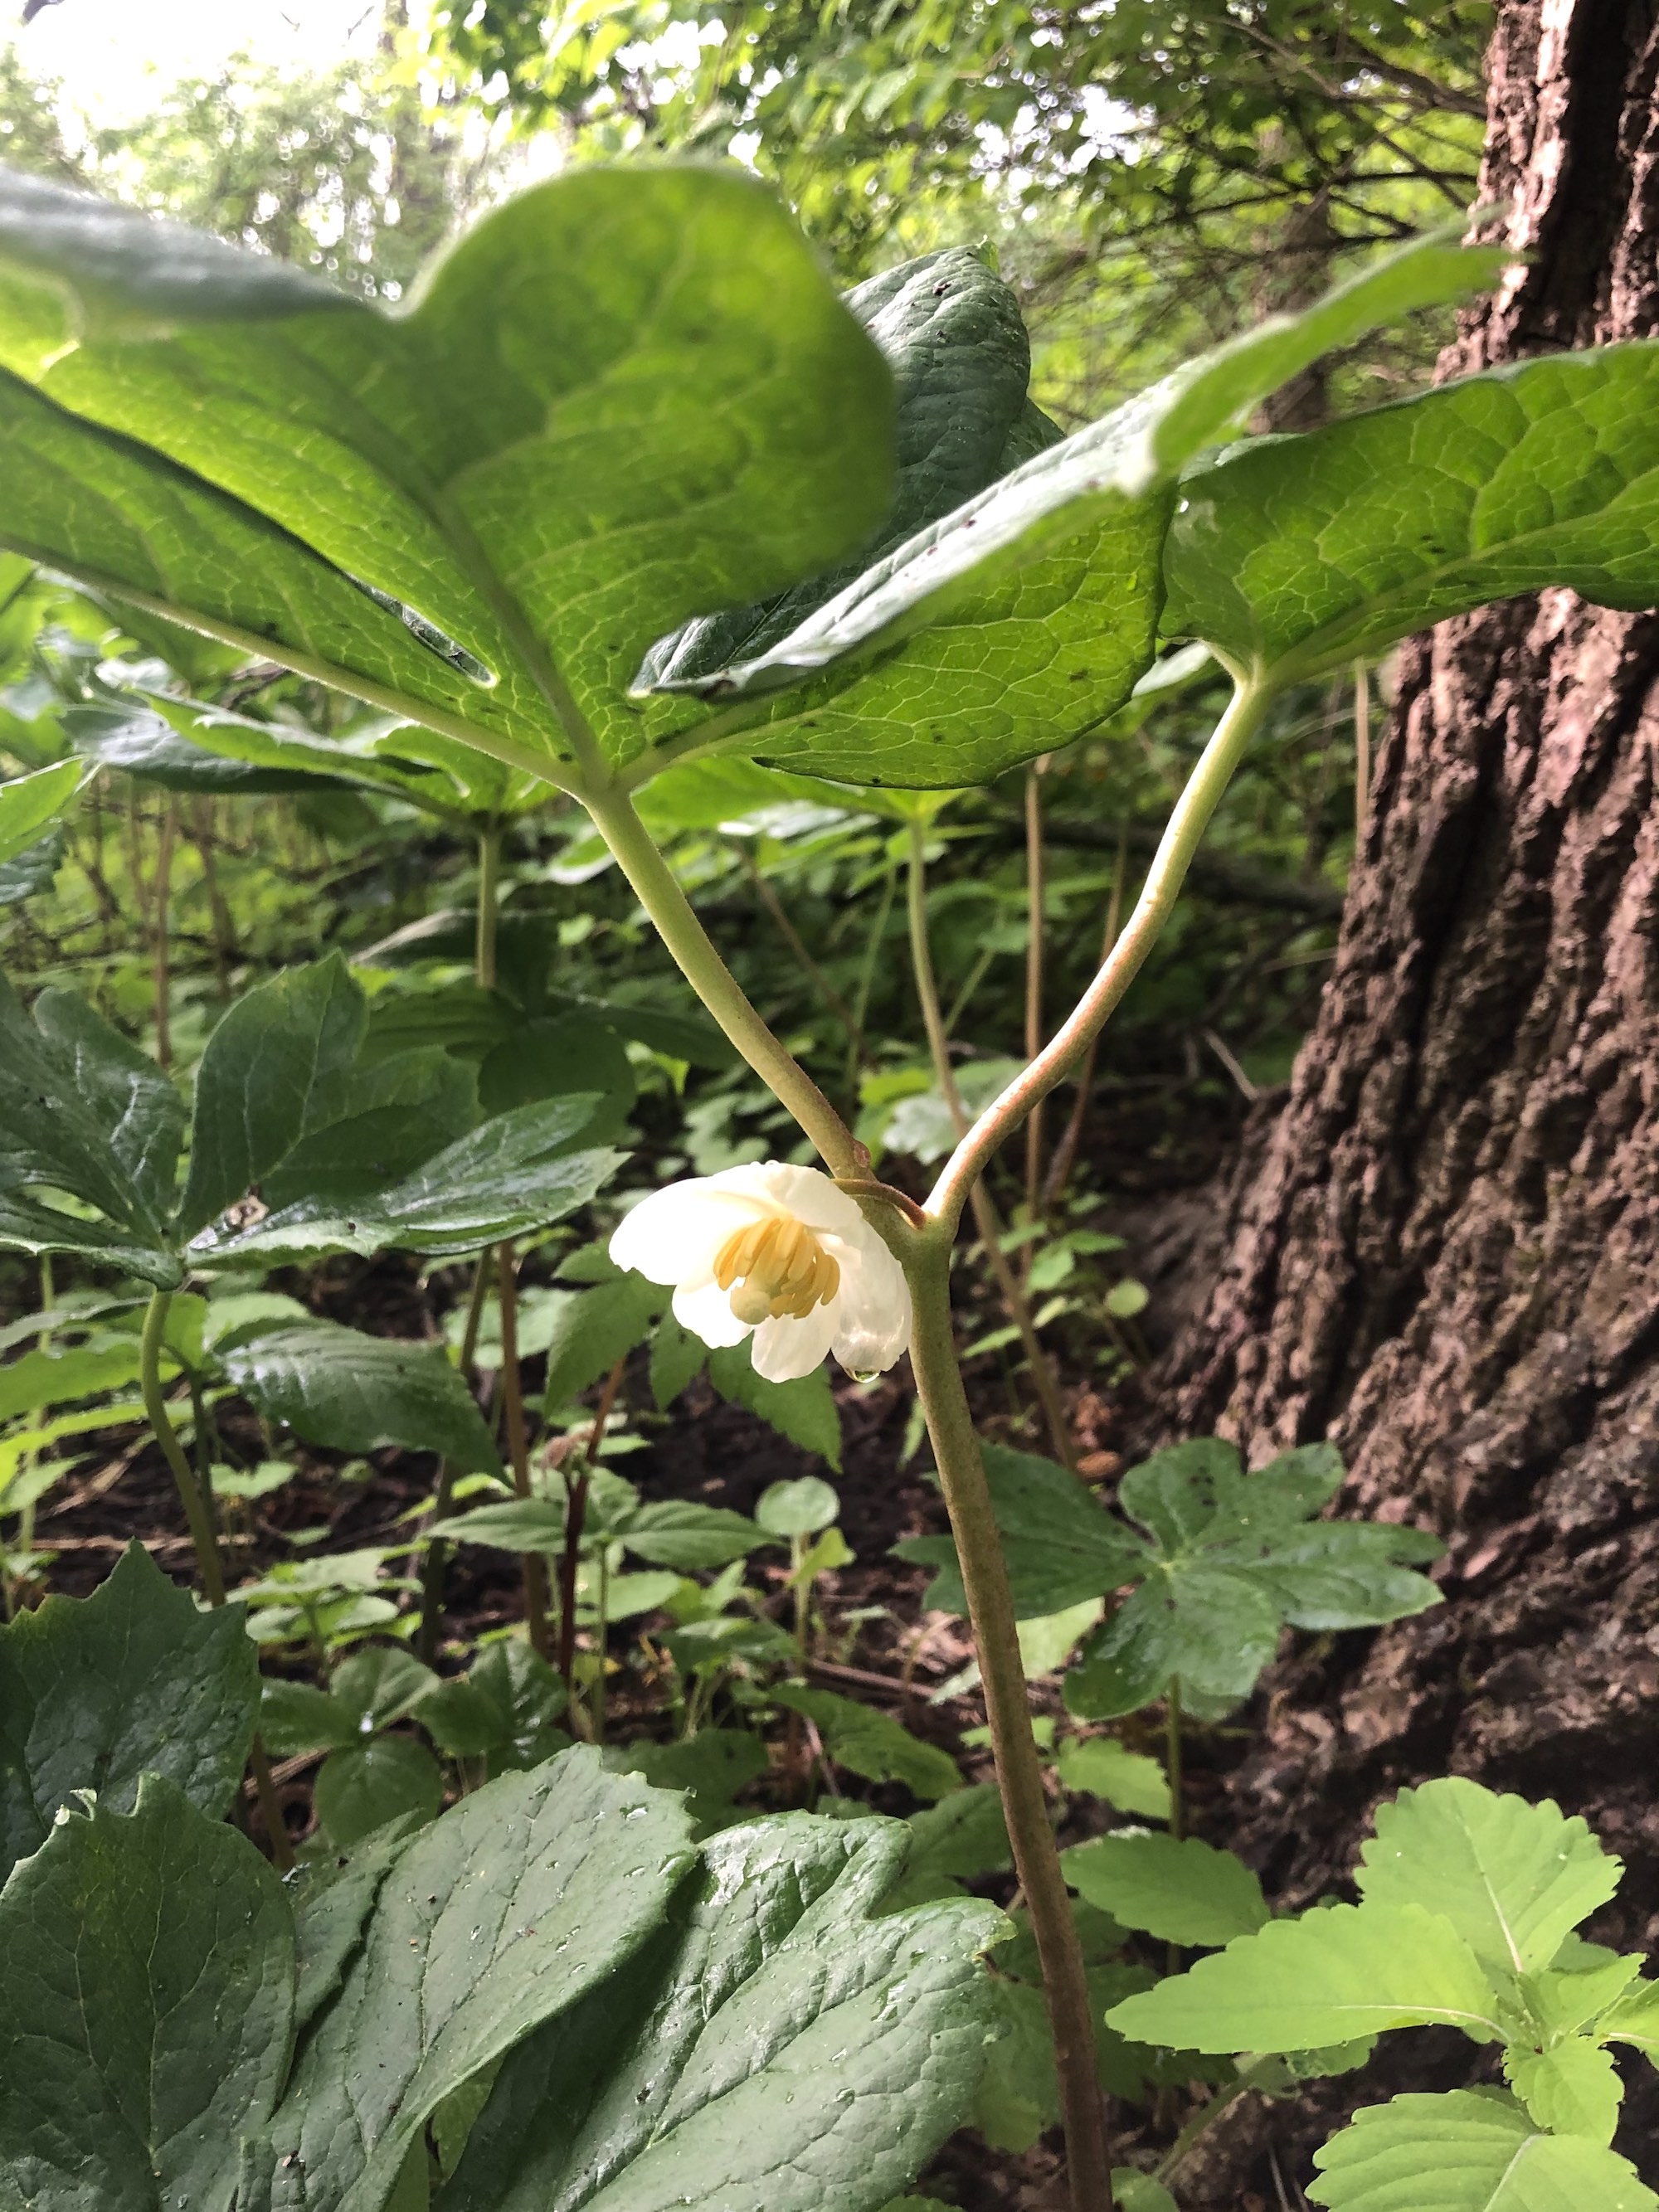 Mayapple blooms between Duck Pond and Marion Dunn Madison, Wisconsin on May 16, 2021.